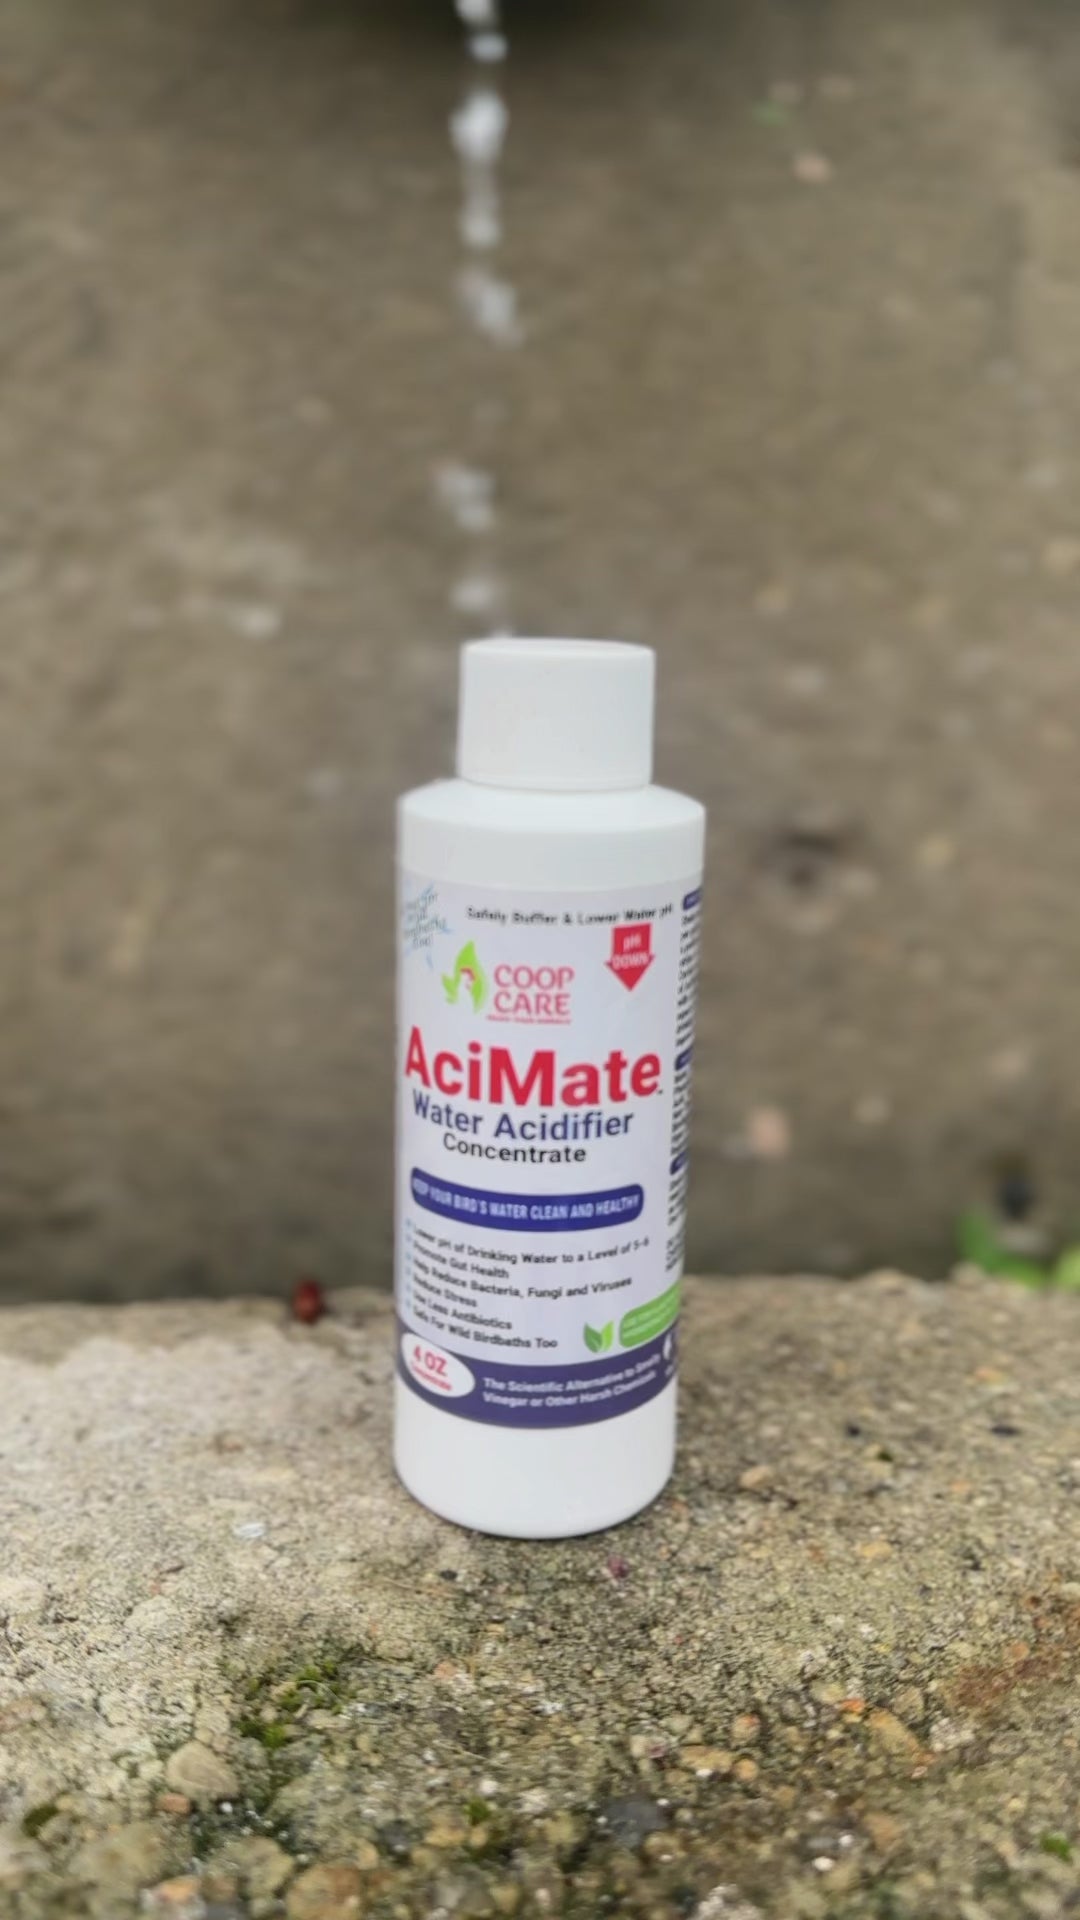 AciMate Water Acidifier Conc. w/ pH Test Strips – Optimize Water pH, No Algae Growth Waterers. 10x Stronger than Apple Cider Vinegar! Pleasant Taste